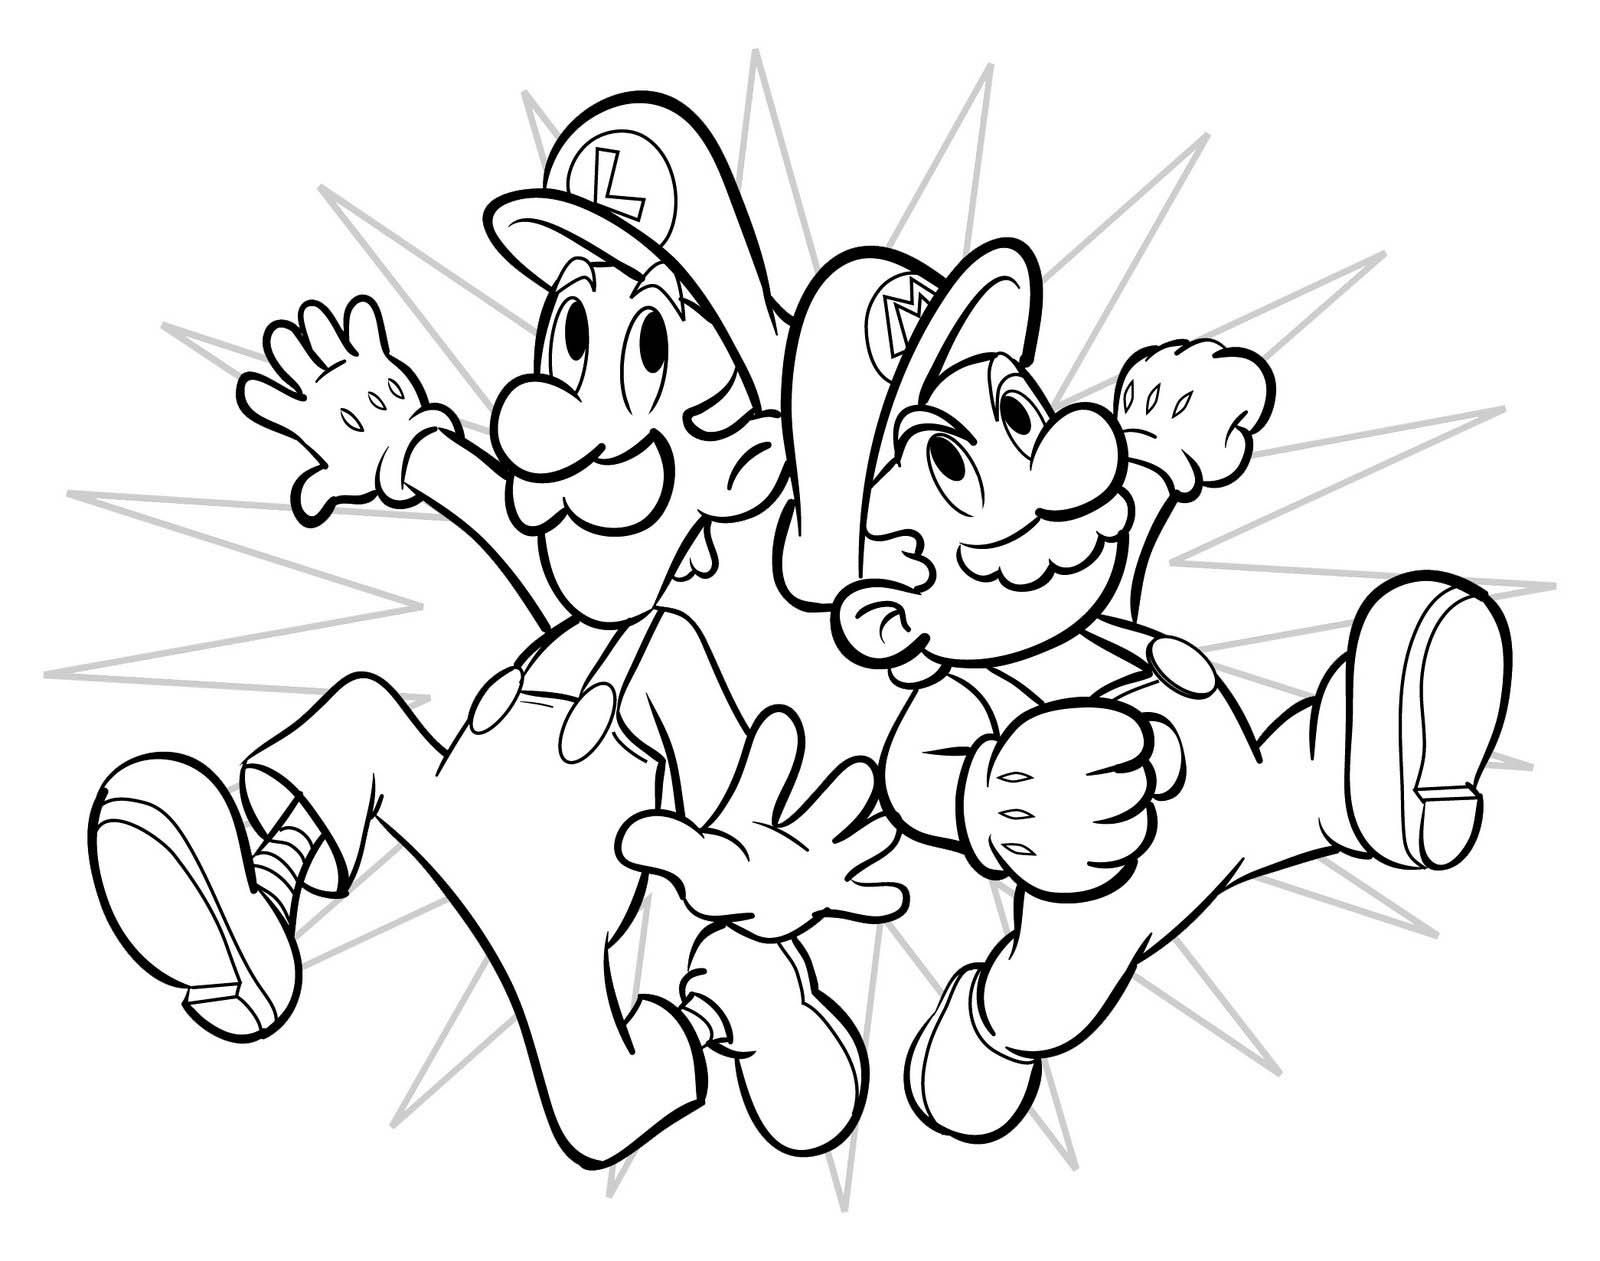 All Mario Characters Coloring Pages